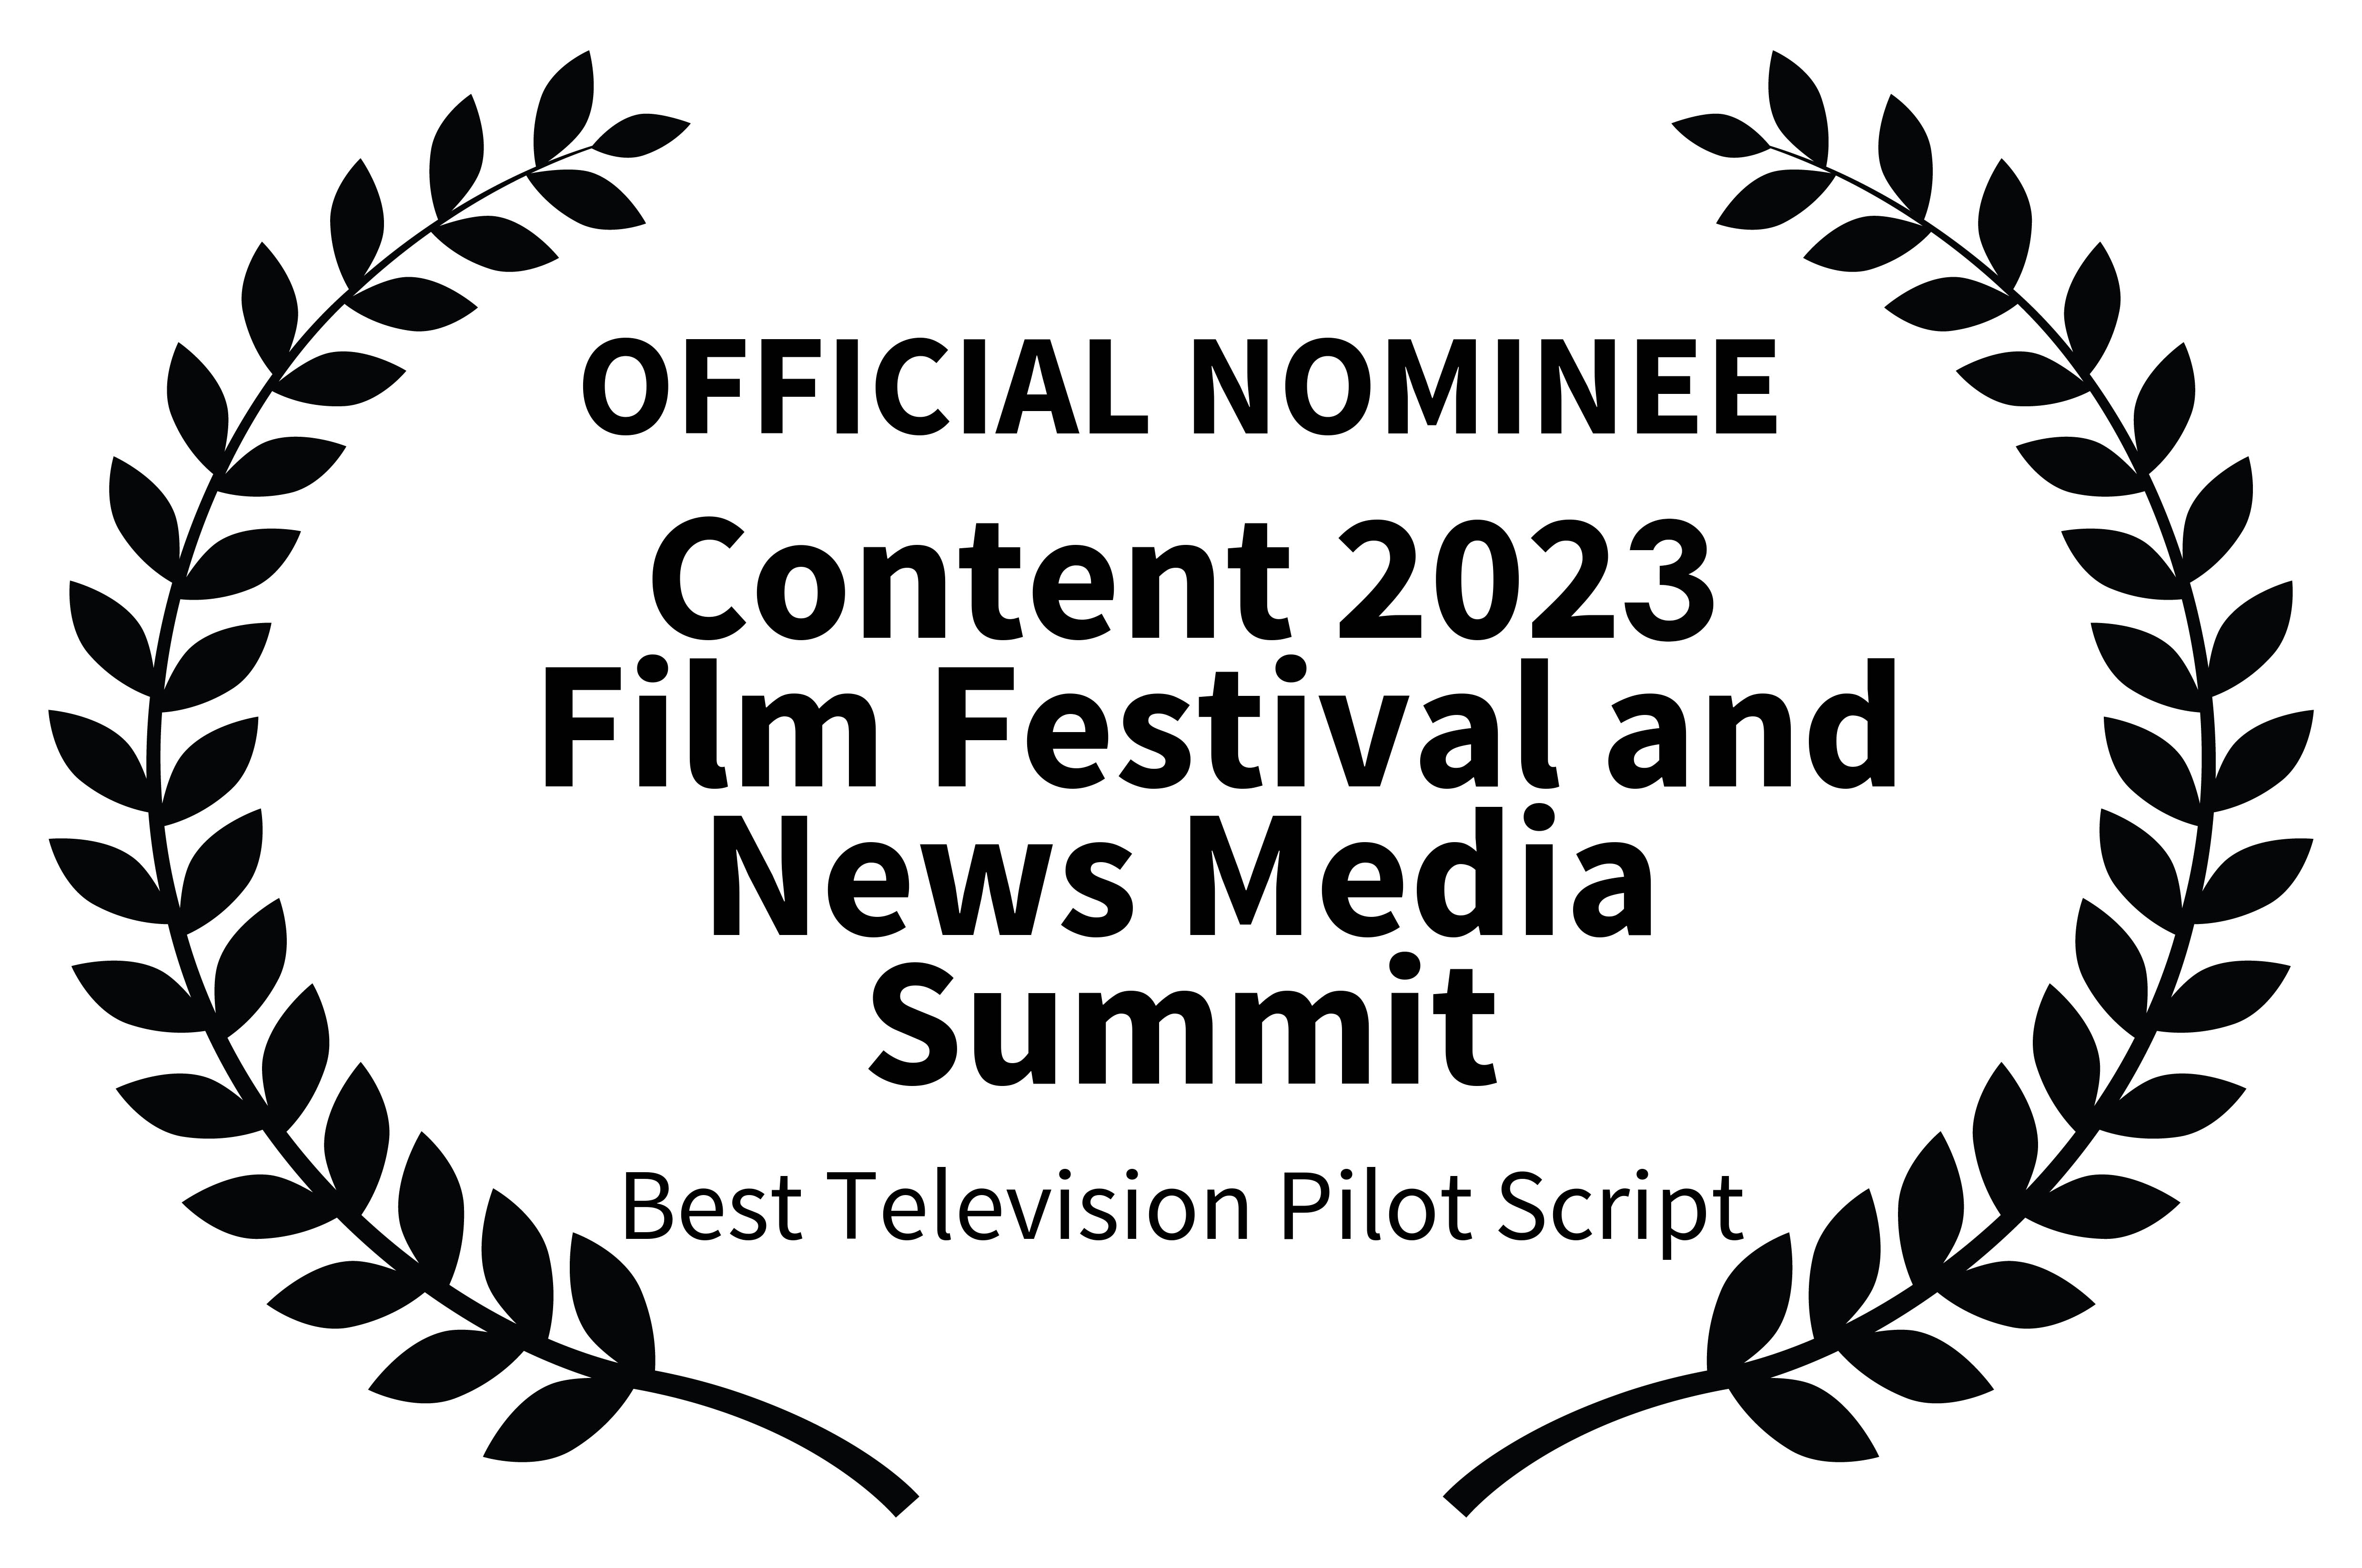 OFFICIAL NOMINEE-Content 2023 Film Festival and News Media Summit-Best Television Pilot Script